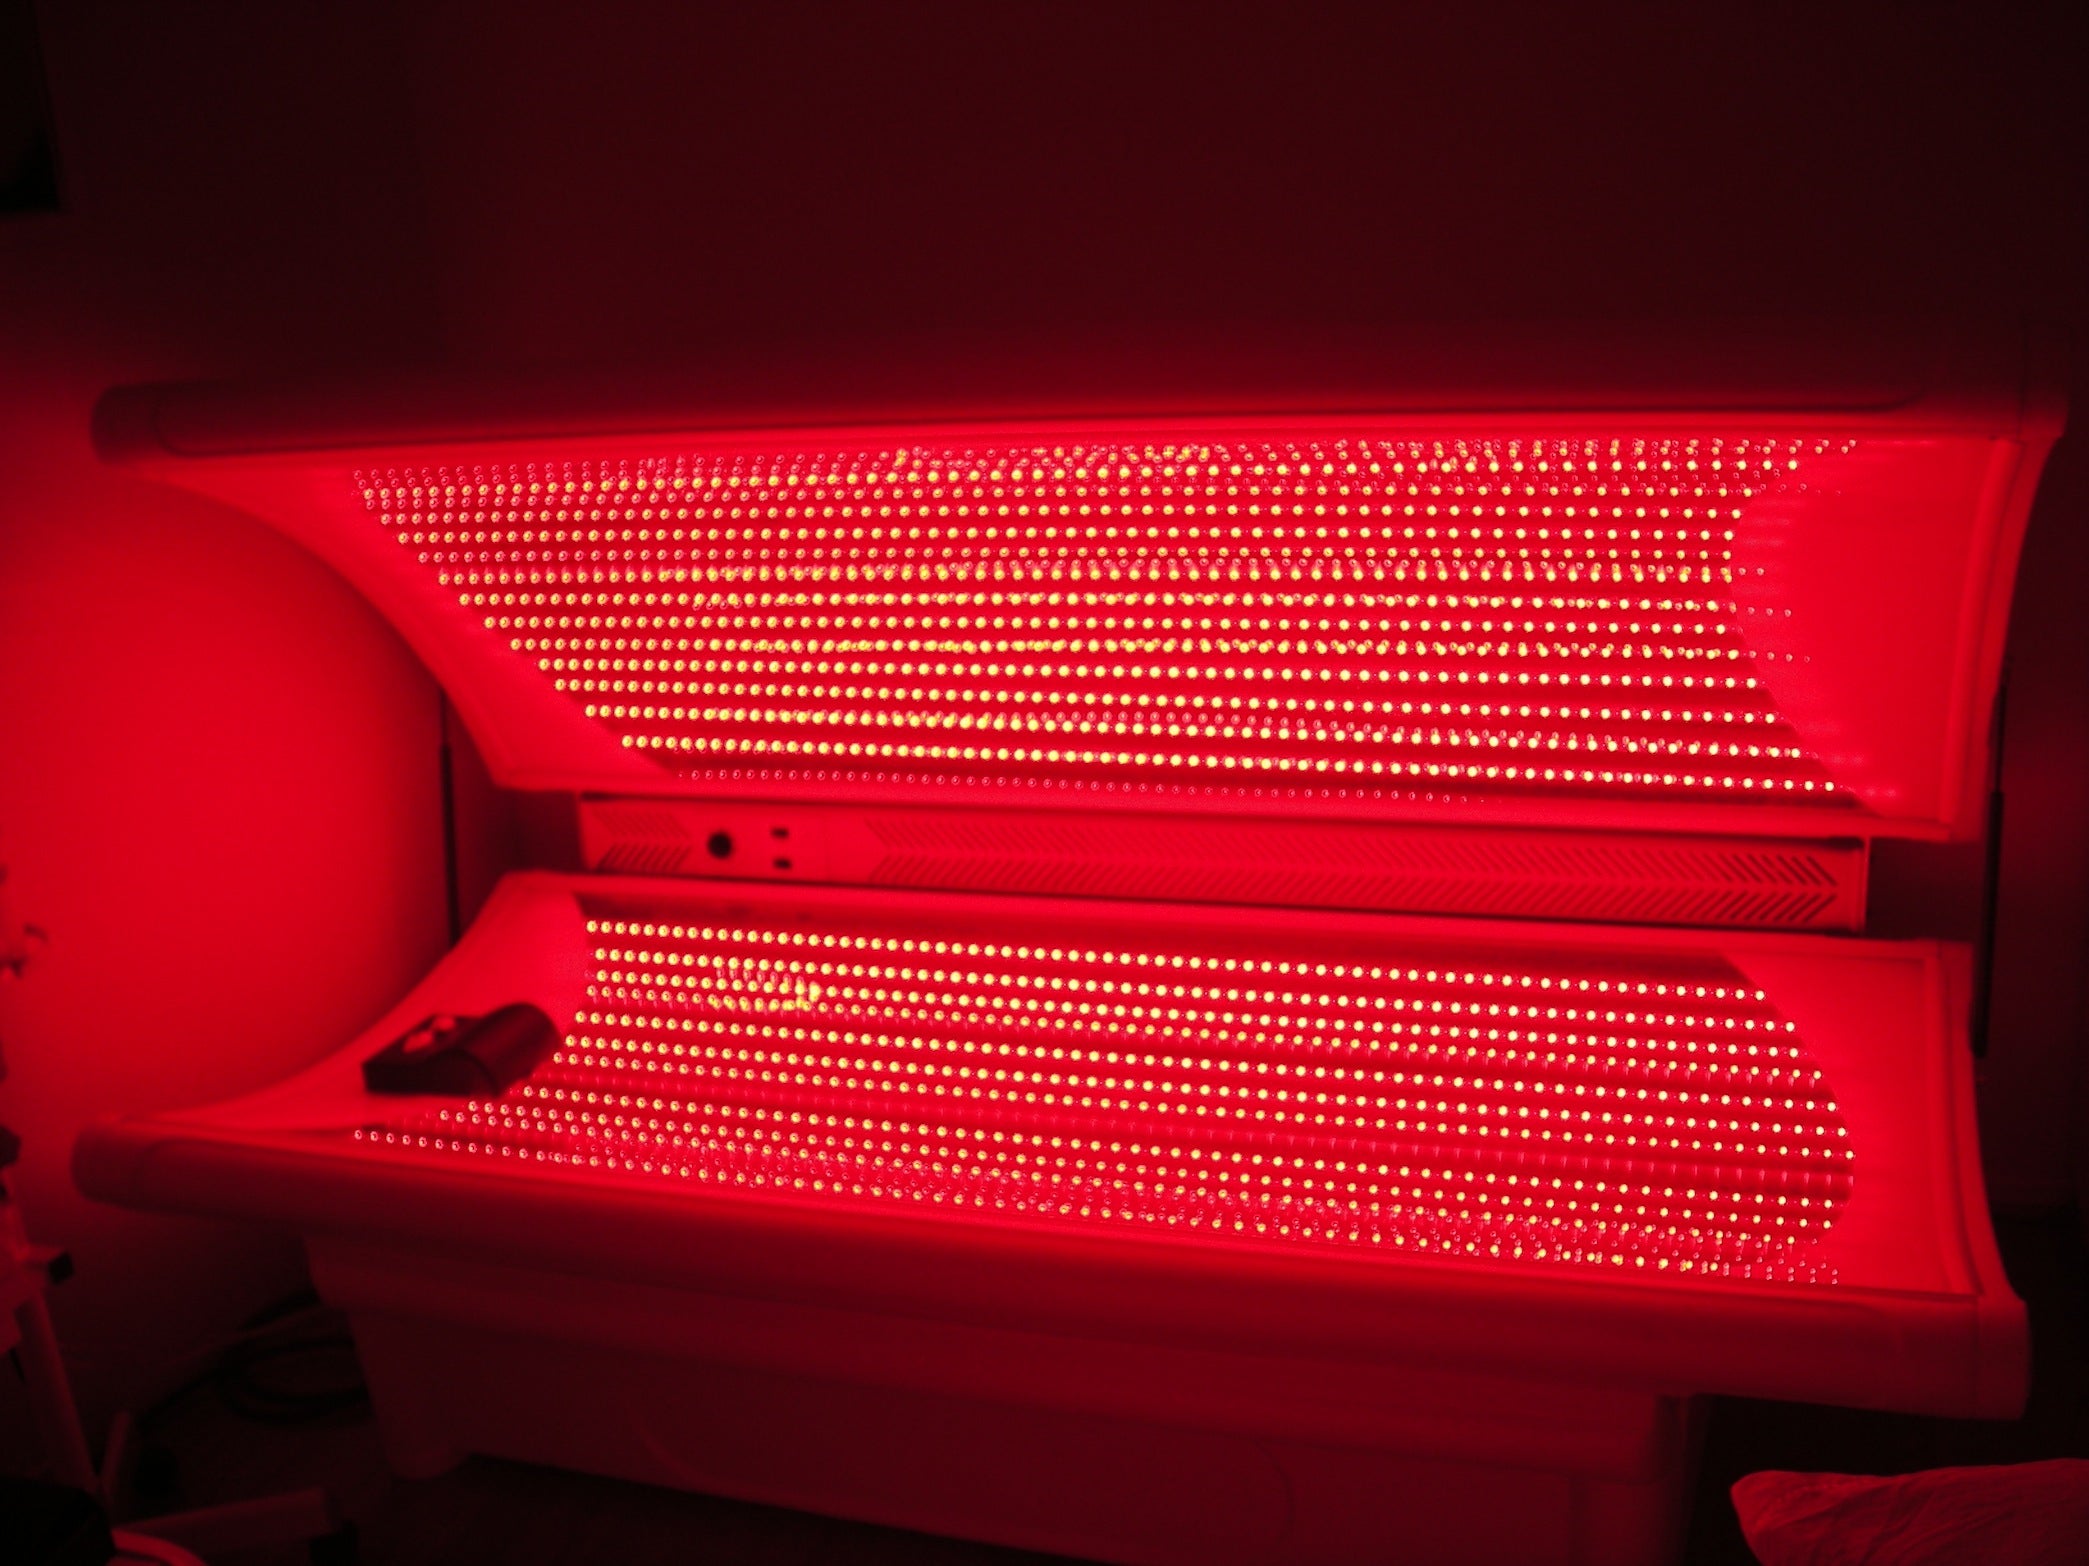 New York Spa Treatments: LED Light Versus Laser for Youthful Skin